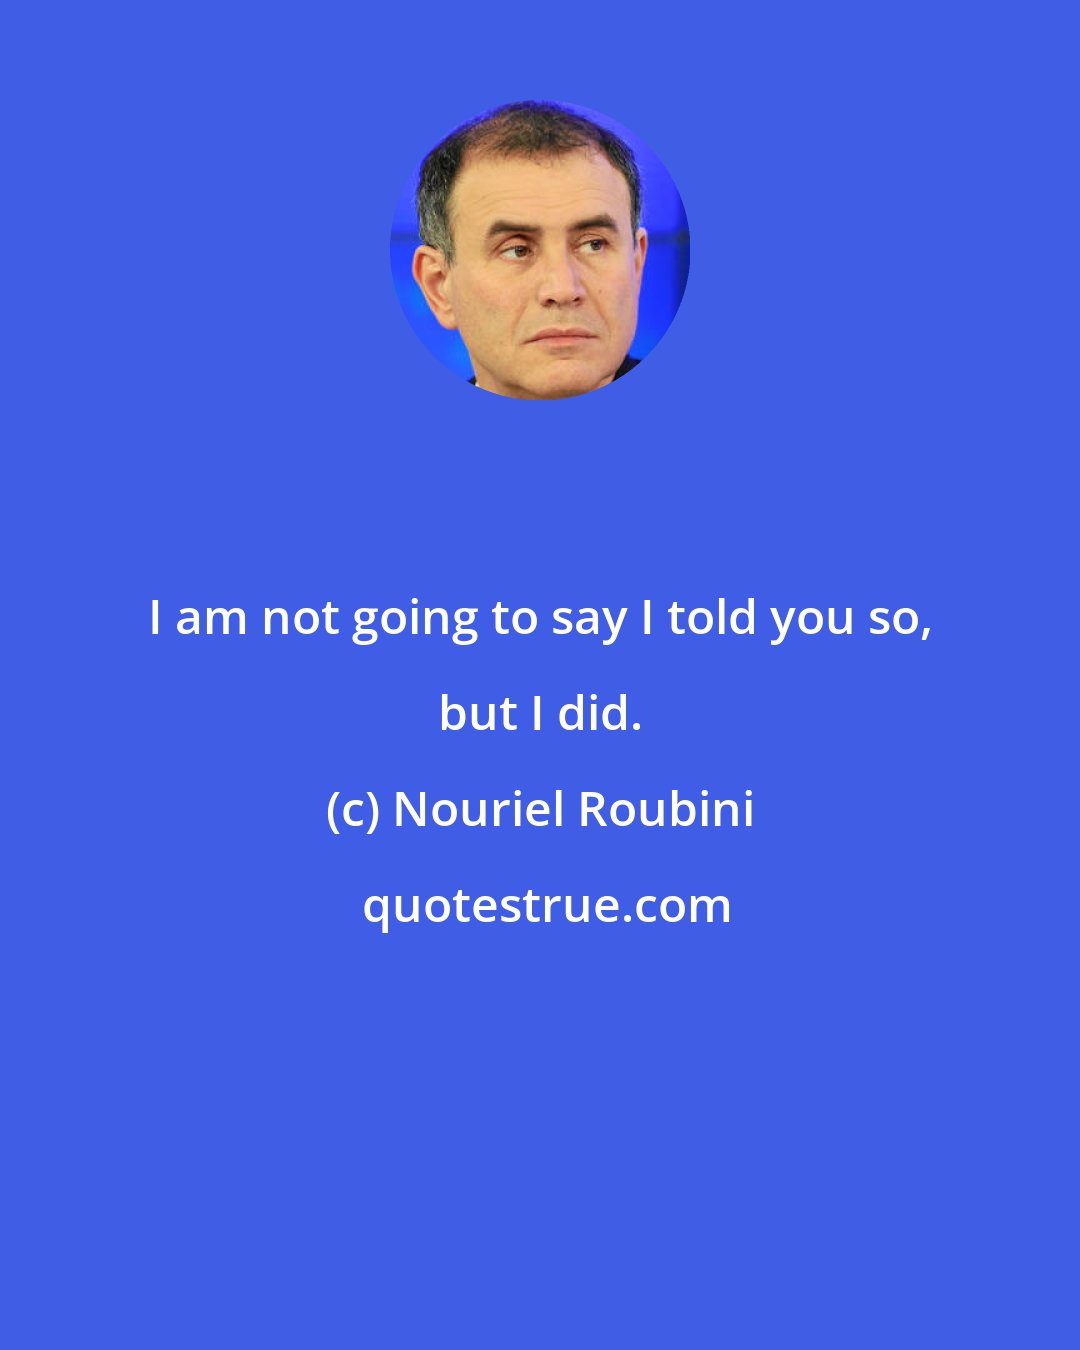 Nouriel Roubini: I am not going to say I told you so, but I did.